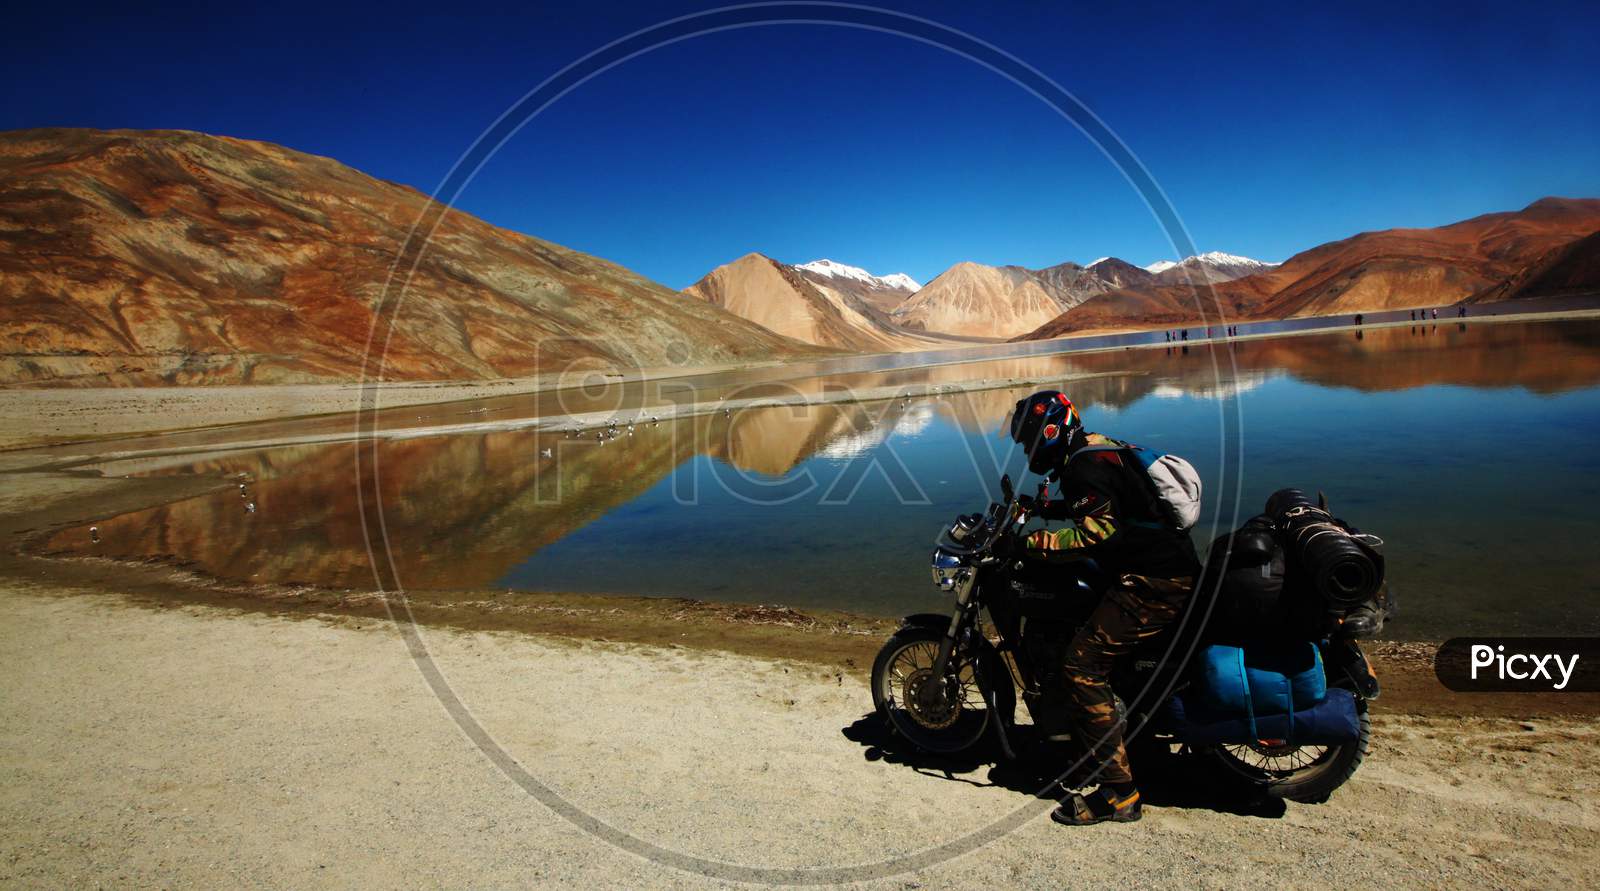 A Bike Rider in Leh with Snow Capped Mountains and Pangong Tso Lake in the Background